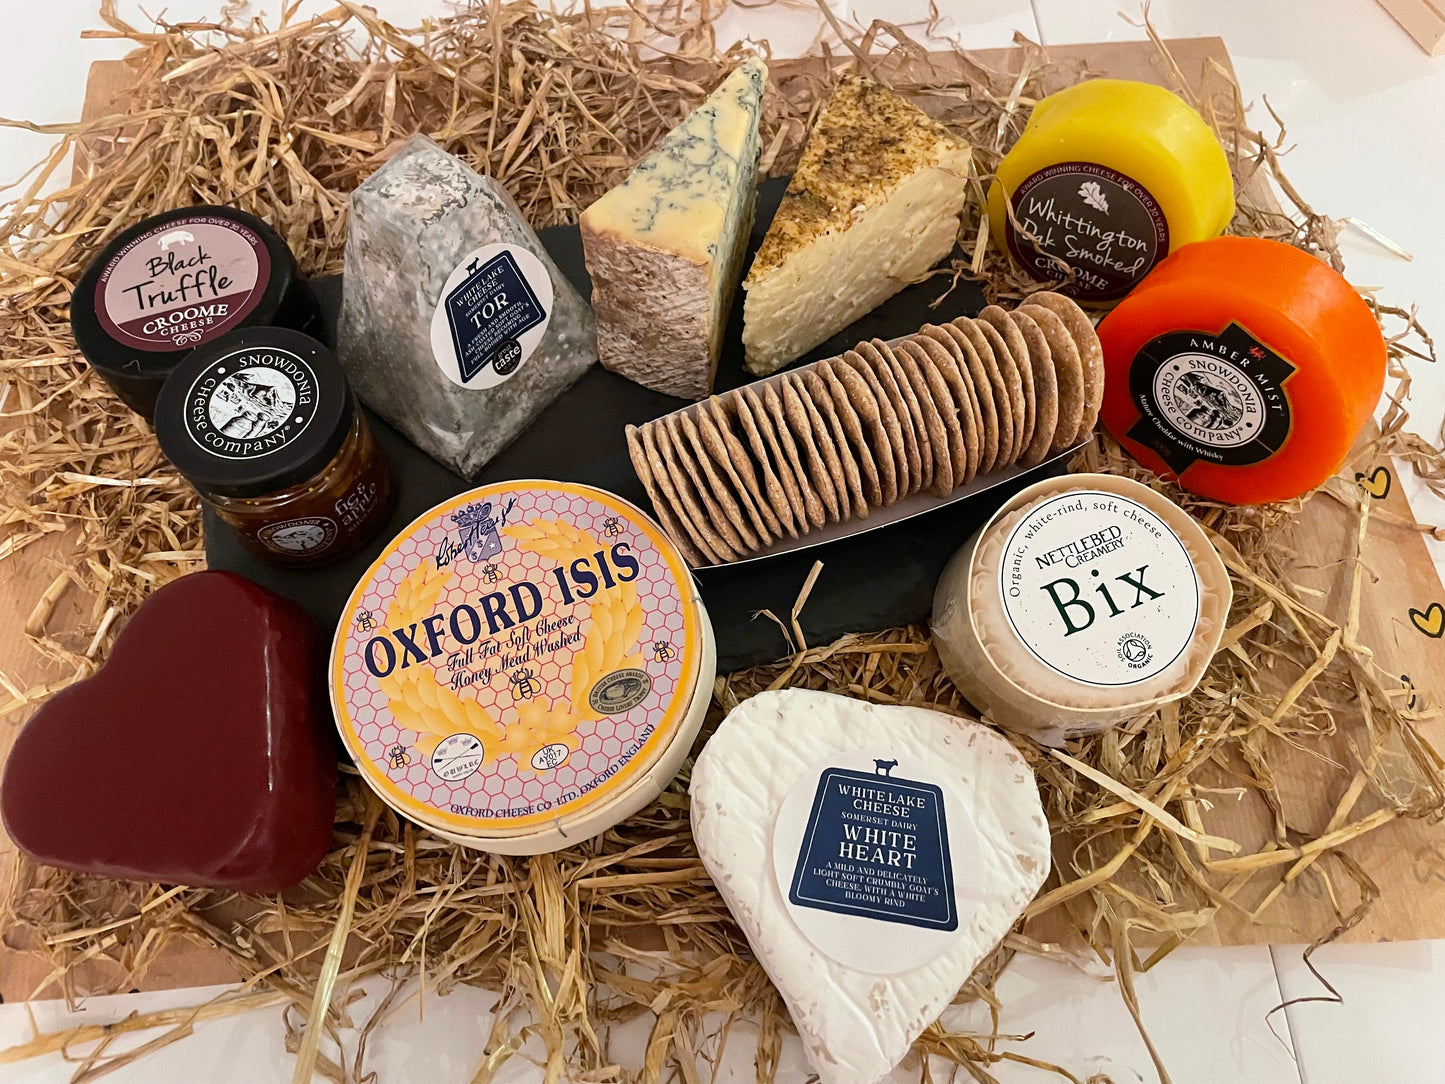 A collection of surprise leftover cheese on offer with discounts